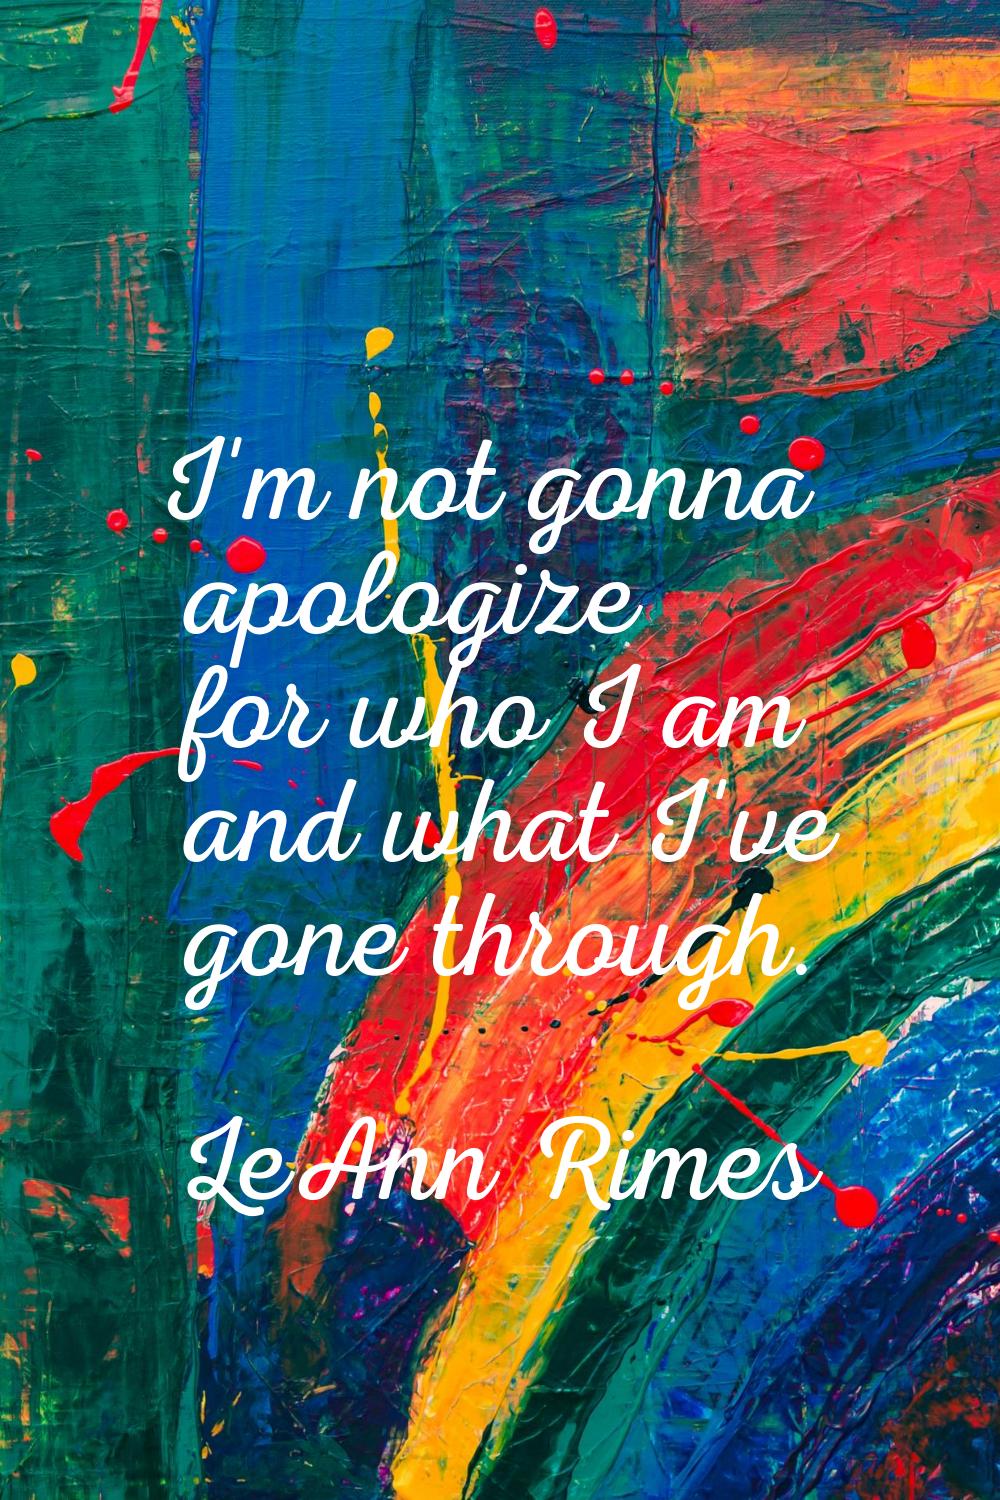 I'm not gonna apologize for who I am and what I've gone through.